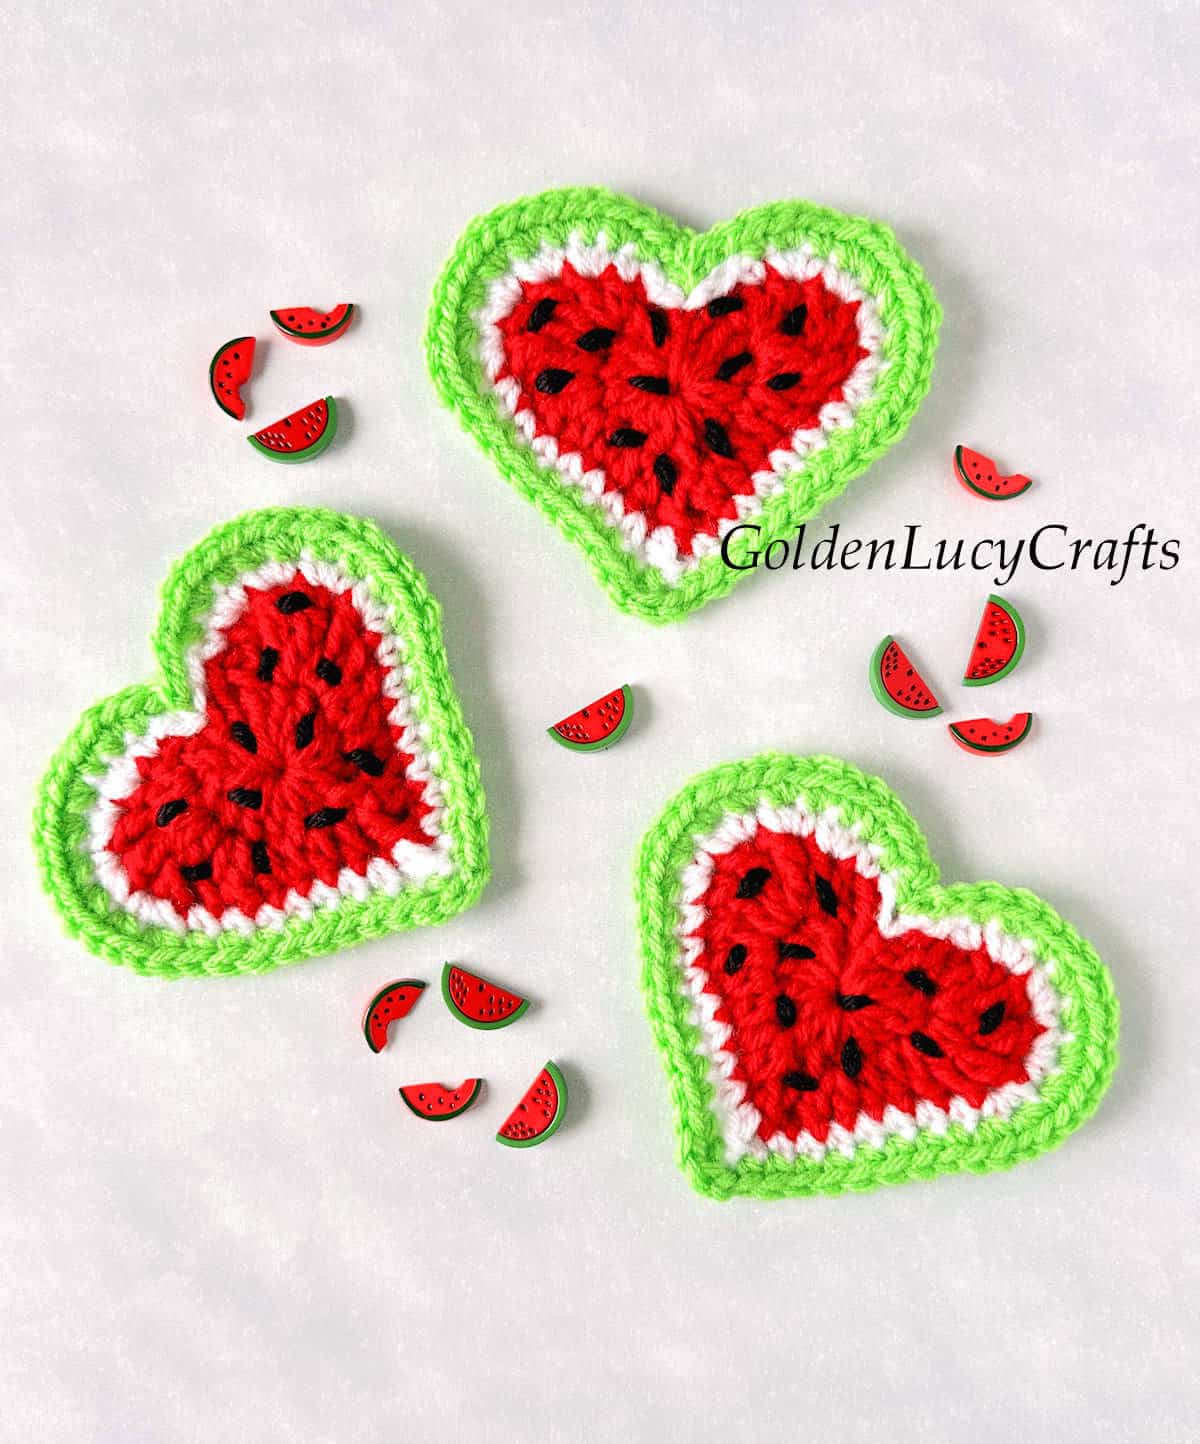 Three crochet watermelon hearts and watermelon craft buttons.